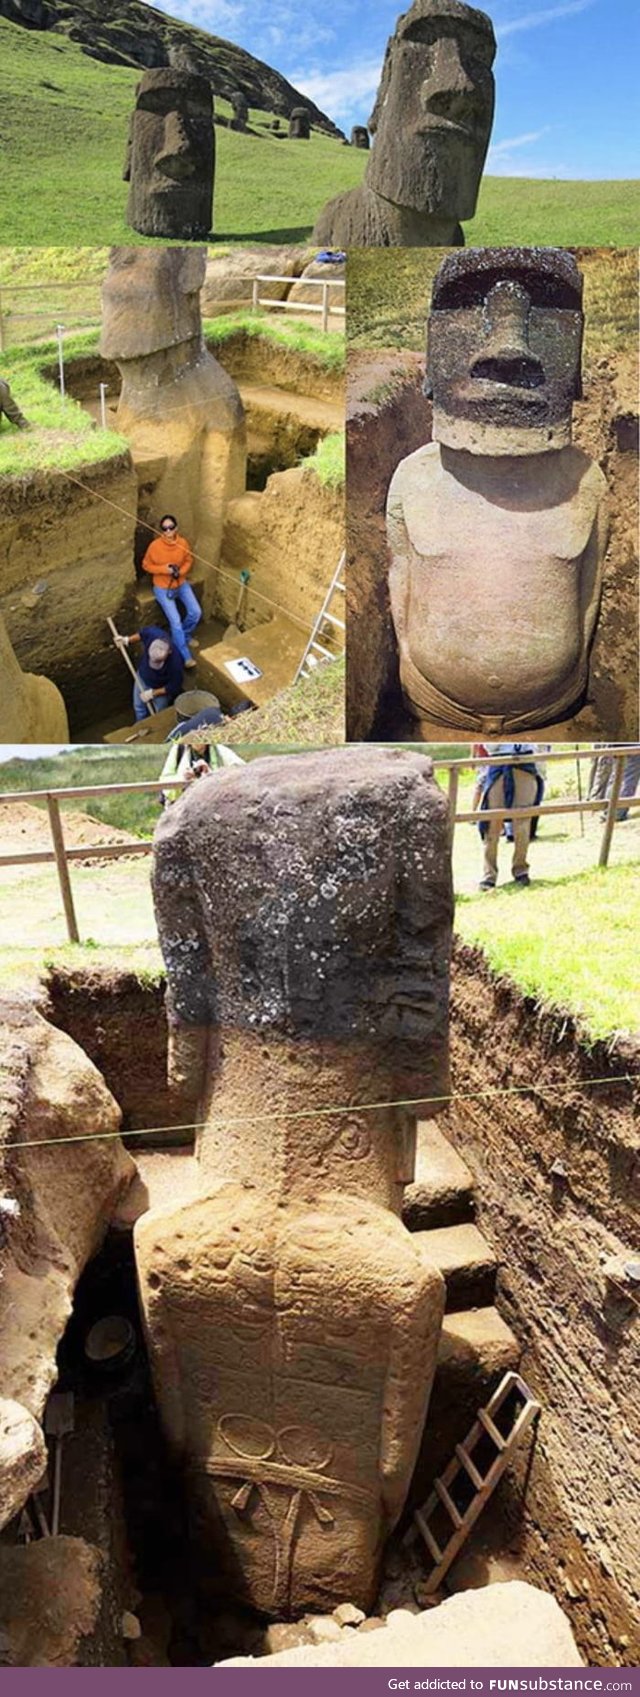 The Easter island statues have bodies